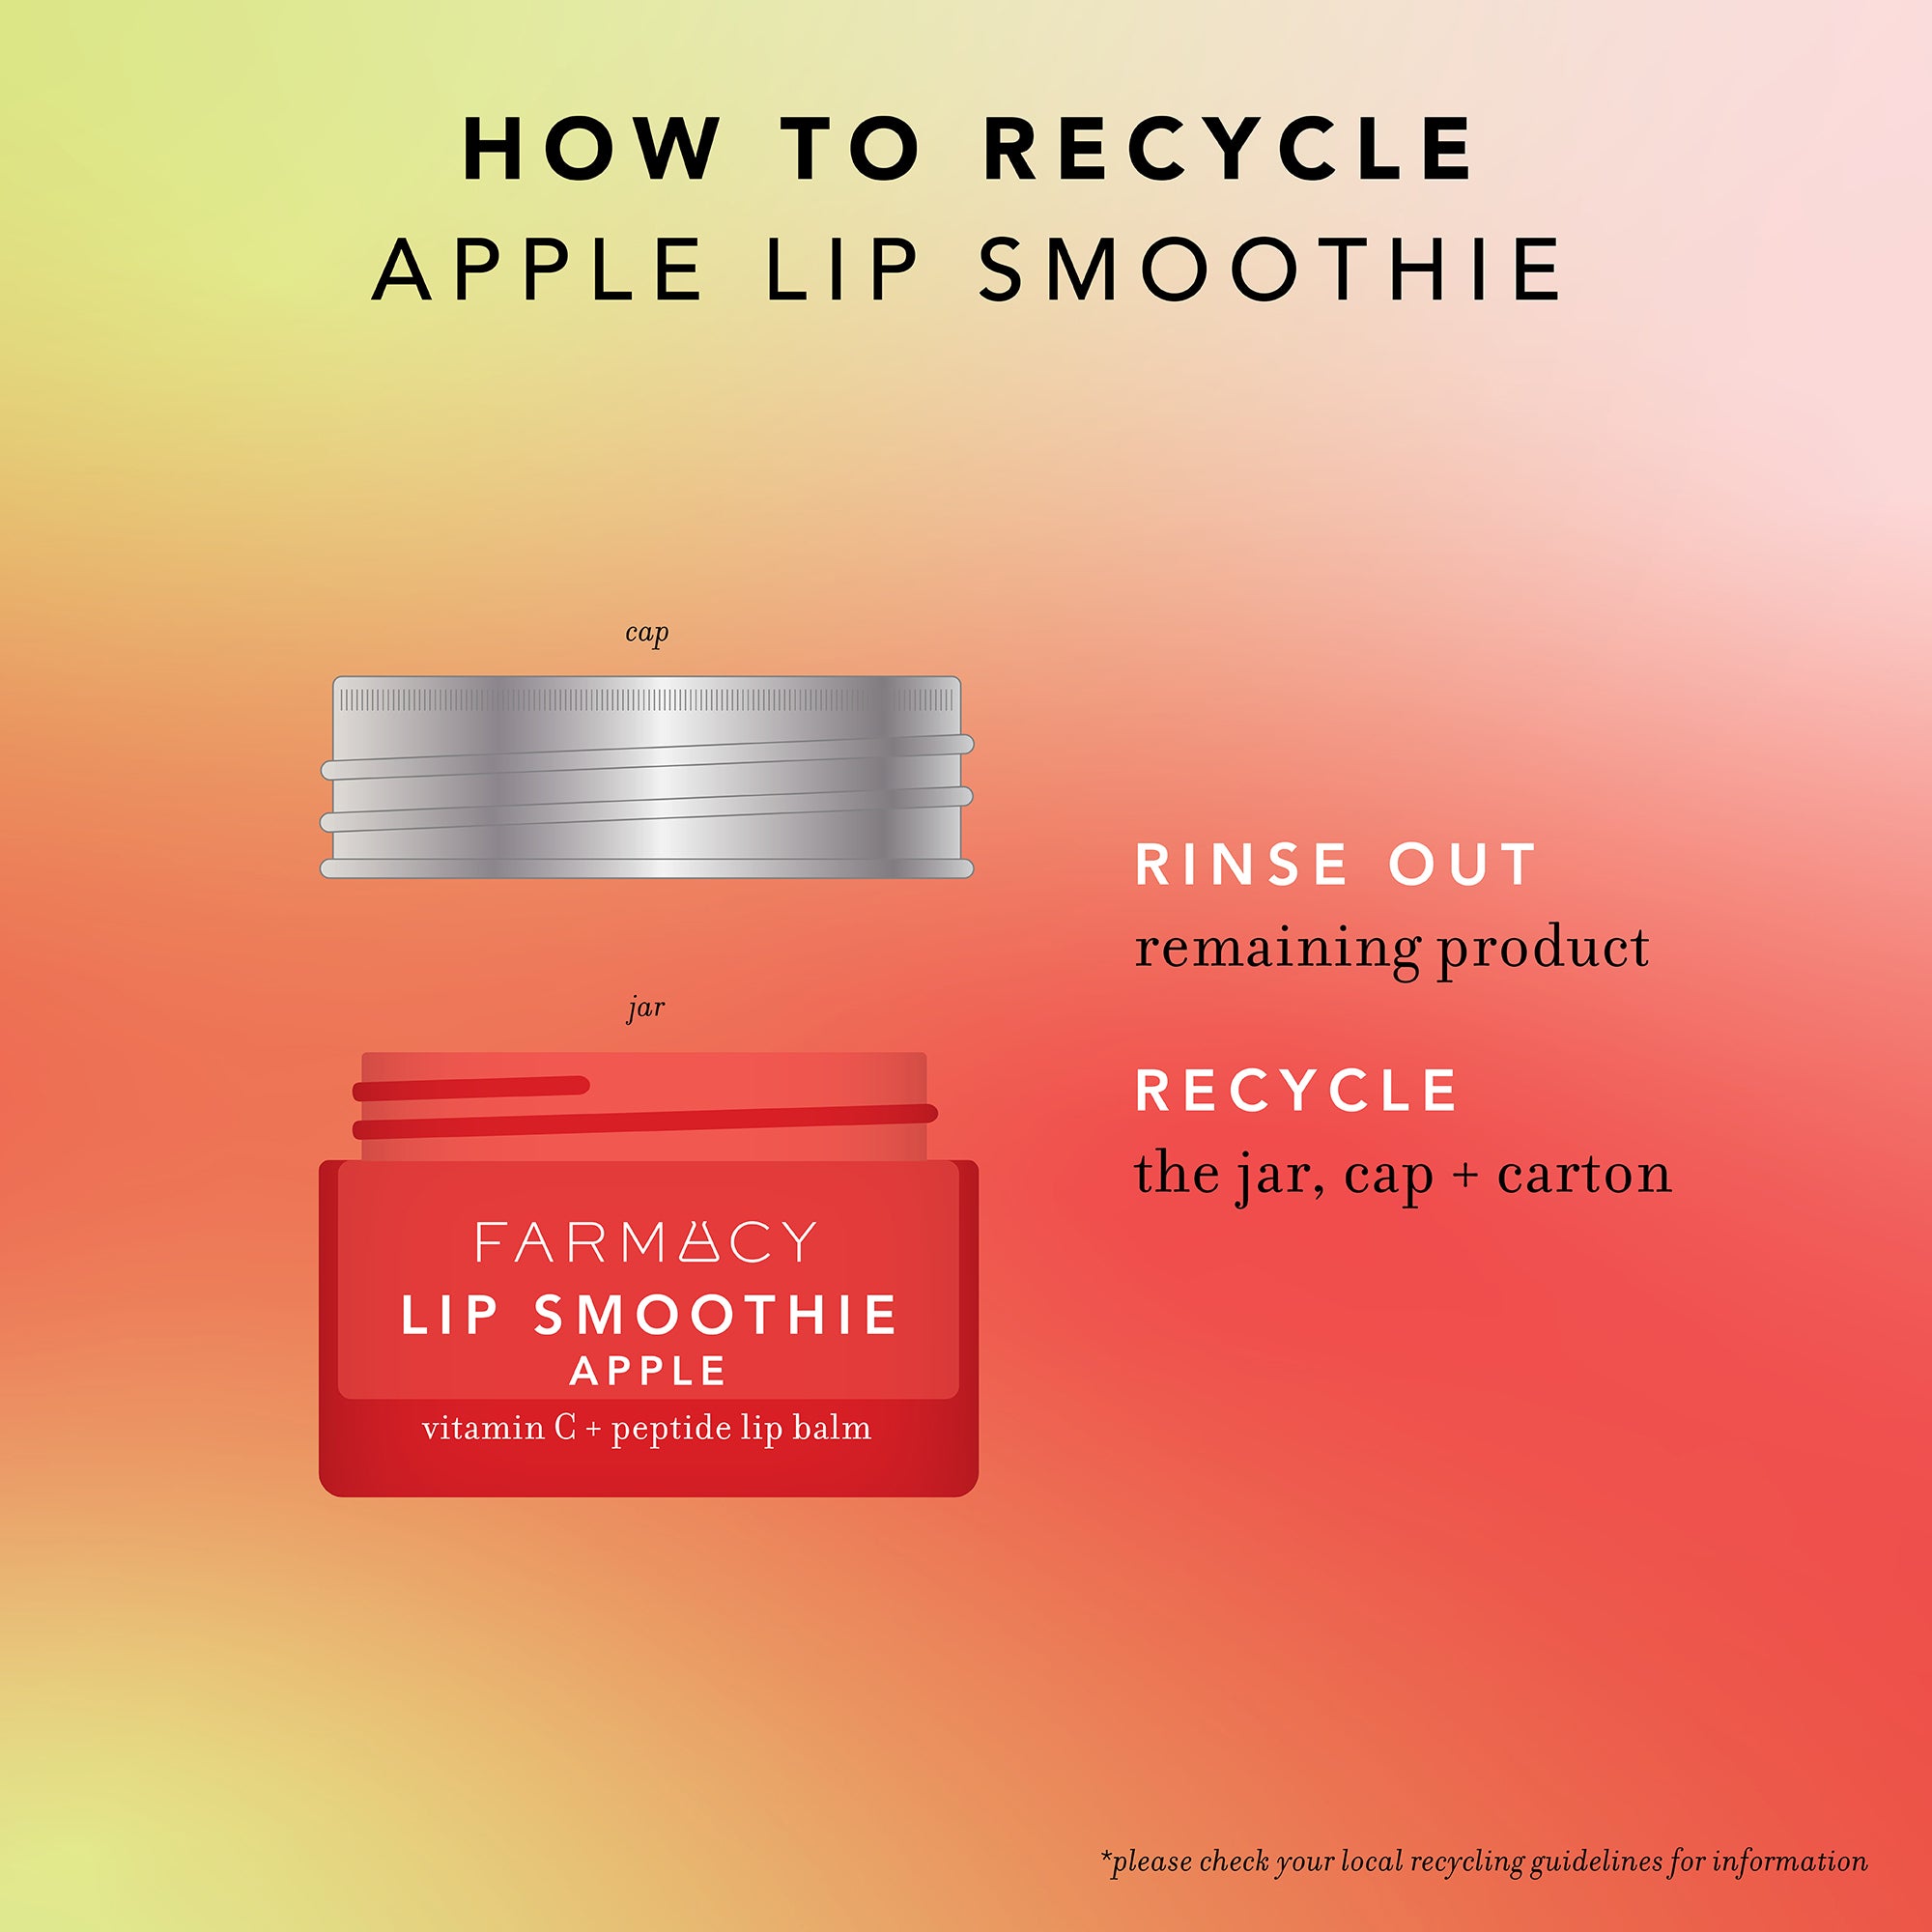 How To Recycle Apple Lip Smoothie